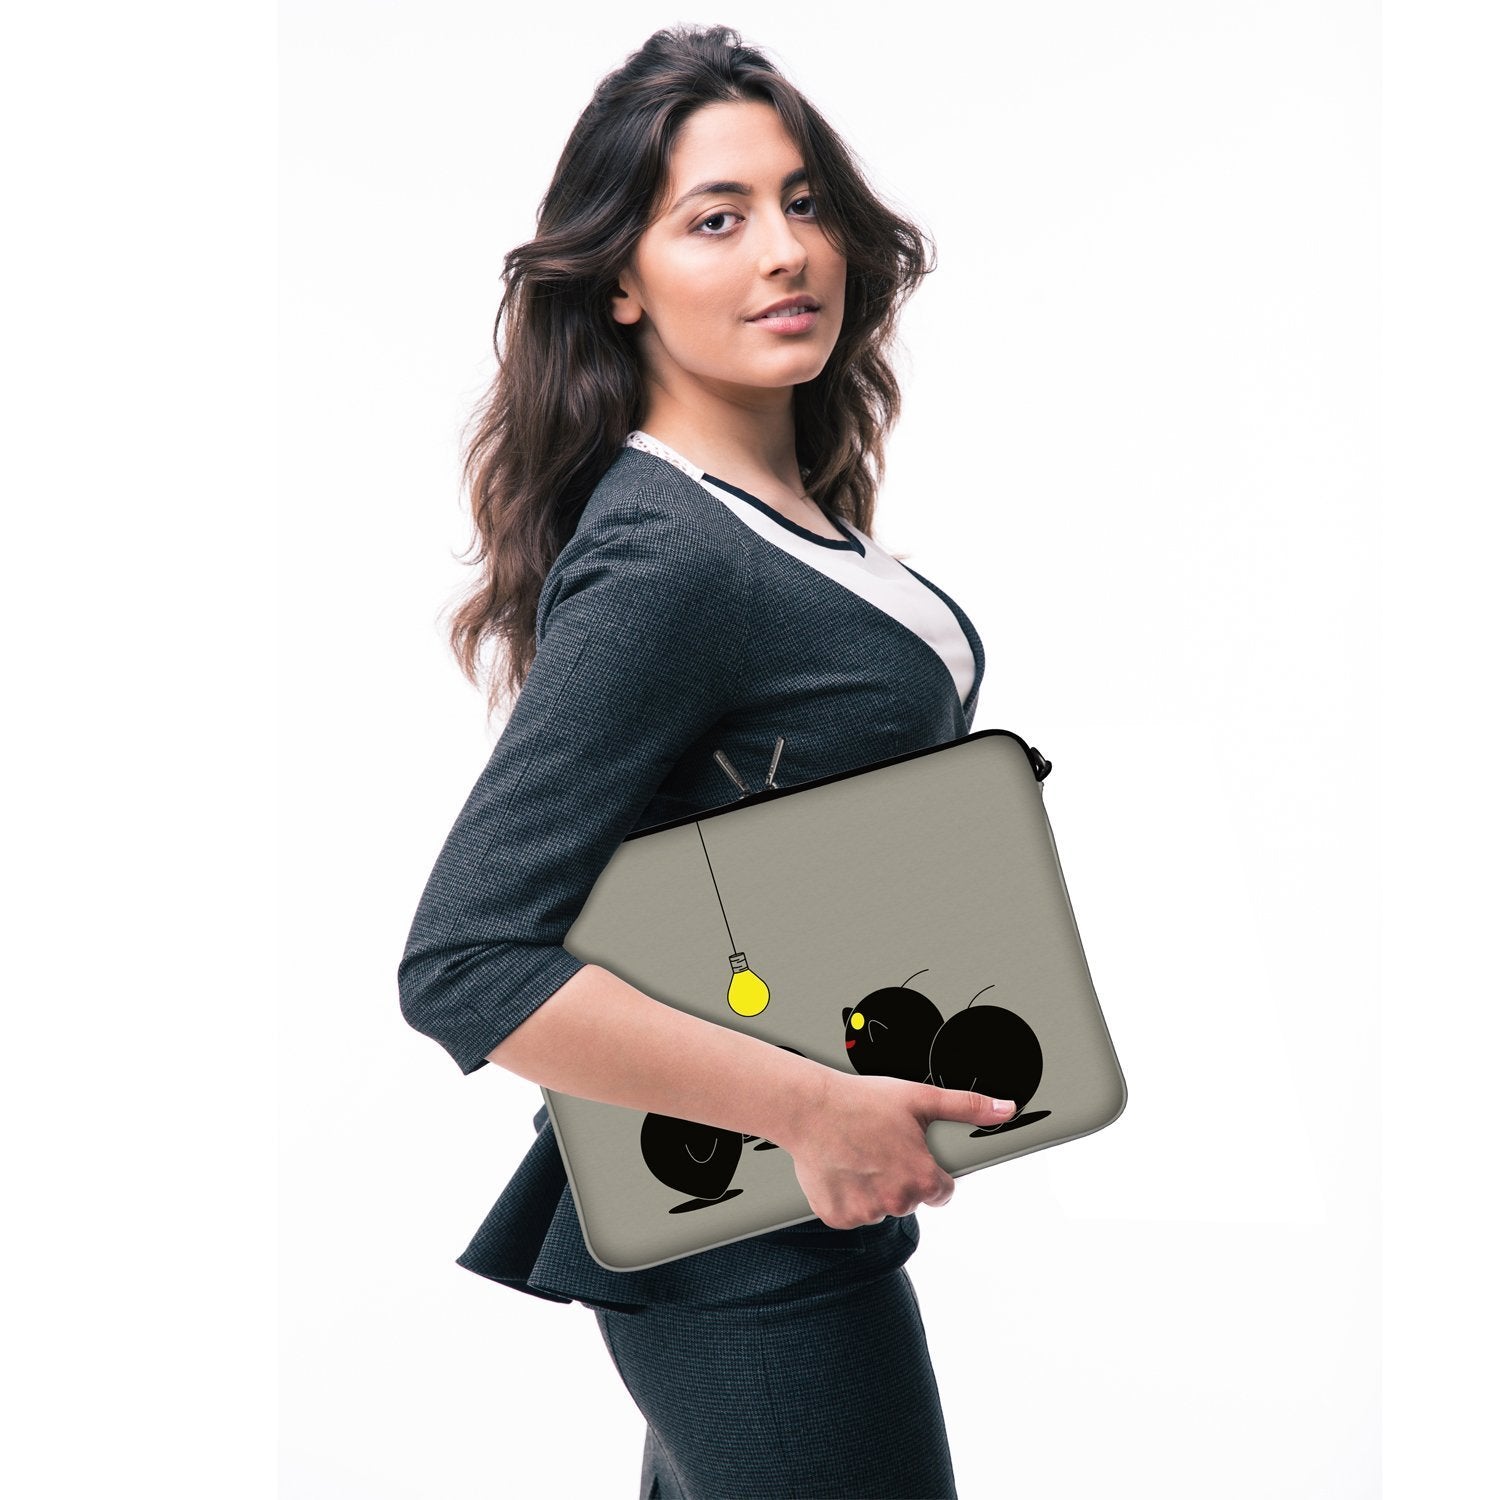 15"- 15.6" (inch) LAPTOP SLEEVE CARRY CASE/BAG NEOPRENE FOR LAPTOPS/NOTEBOOKS, ZIPPED *Flowers and Butterfly*